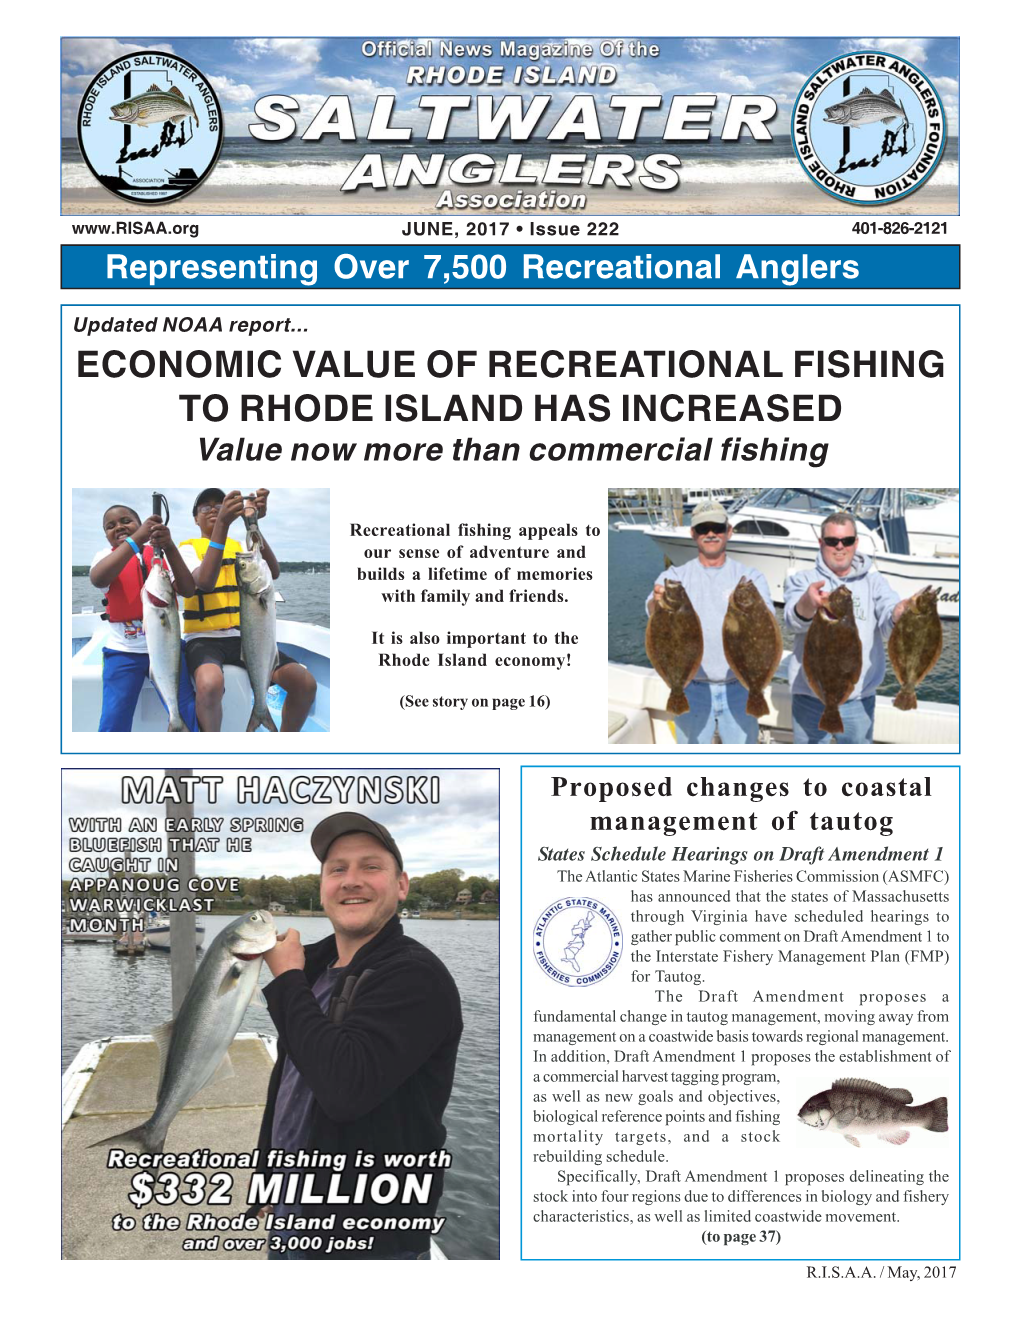 ECONOMIC VALUE of RECREATIONAL FISHING to RHODE ISLAND HAS INCREASED Value Now More Than Commercial Fishing